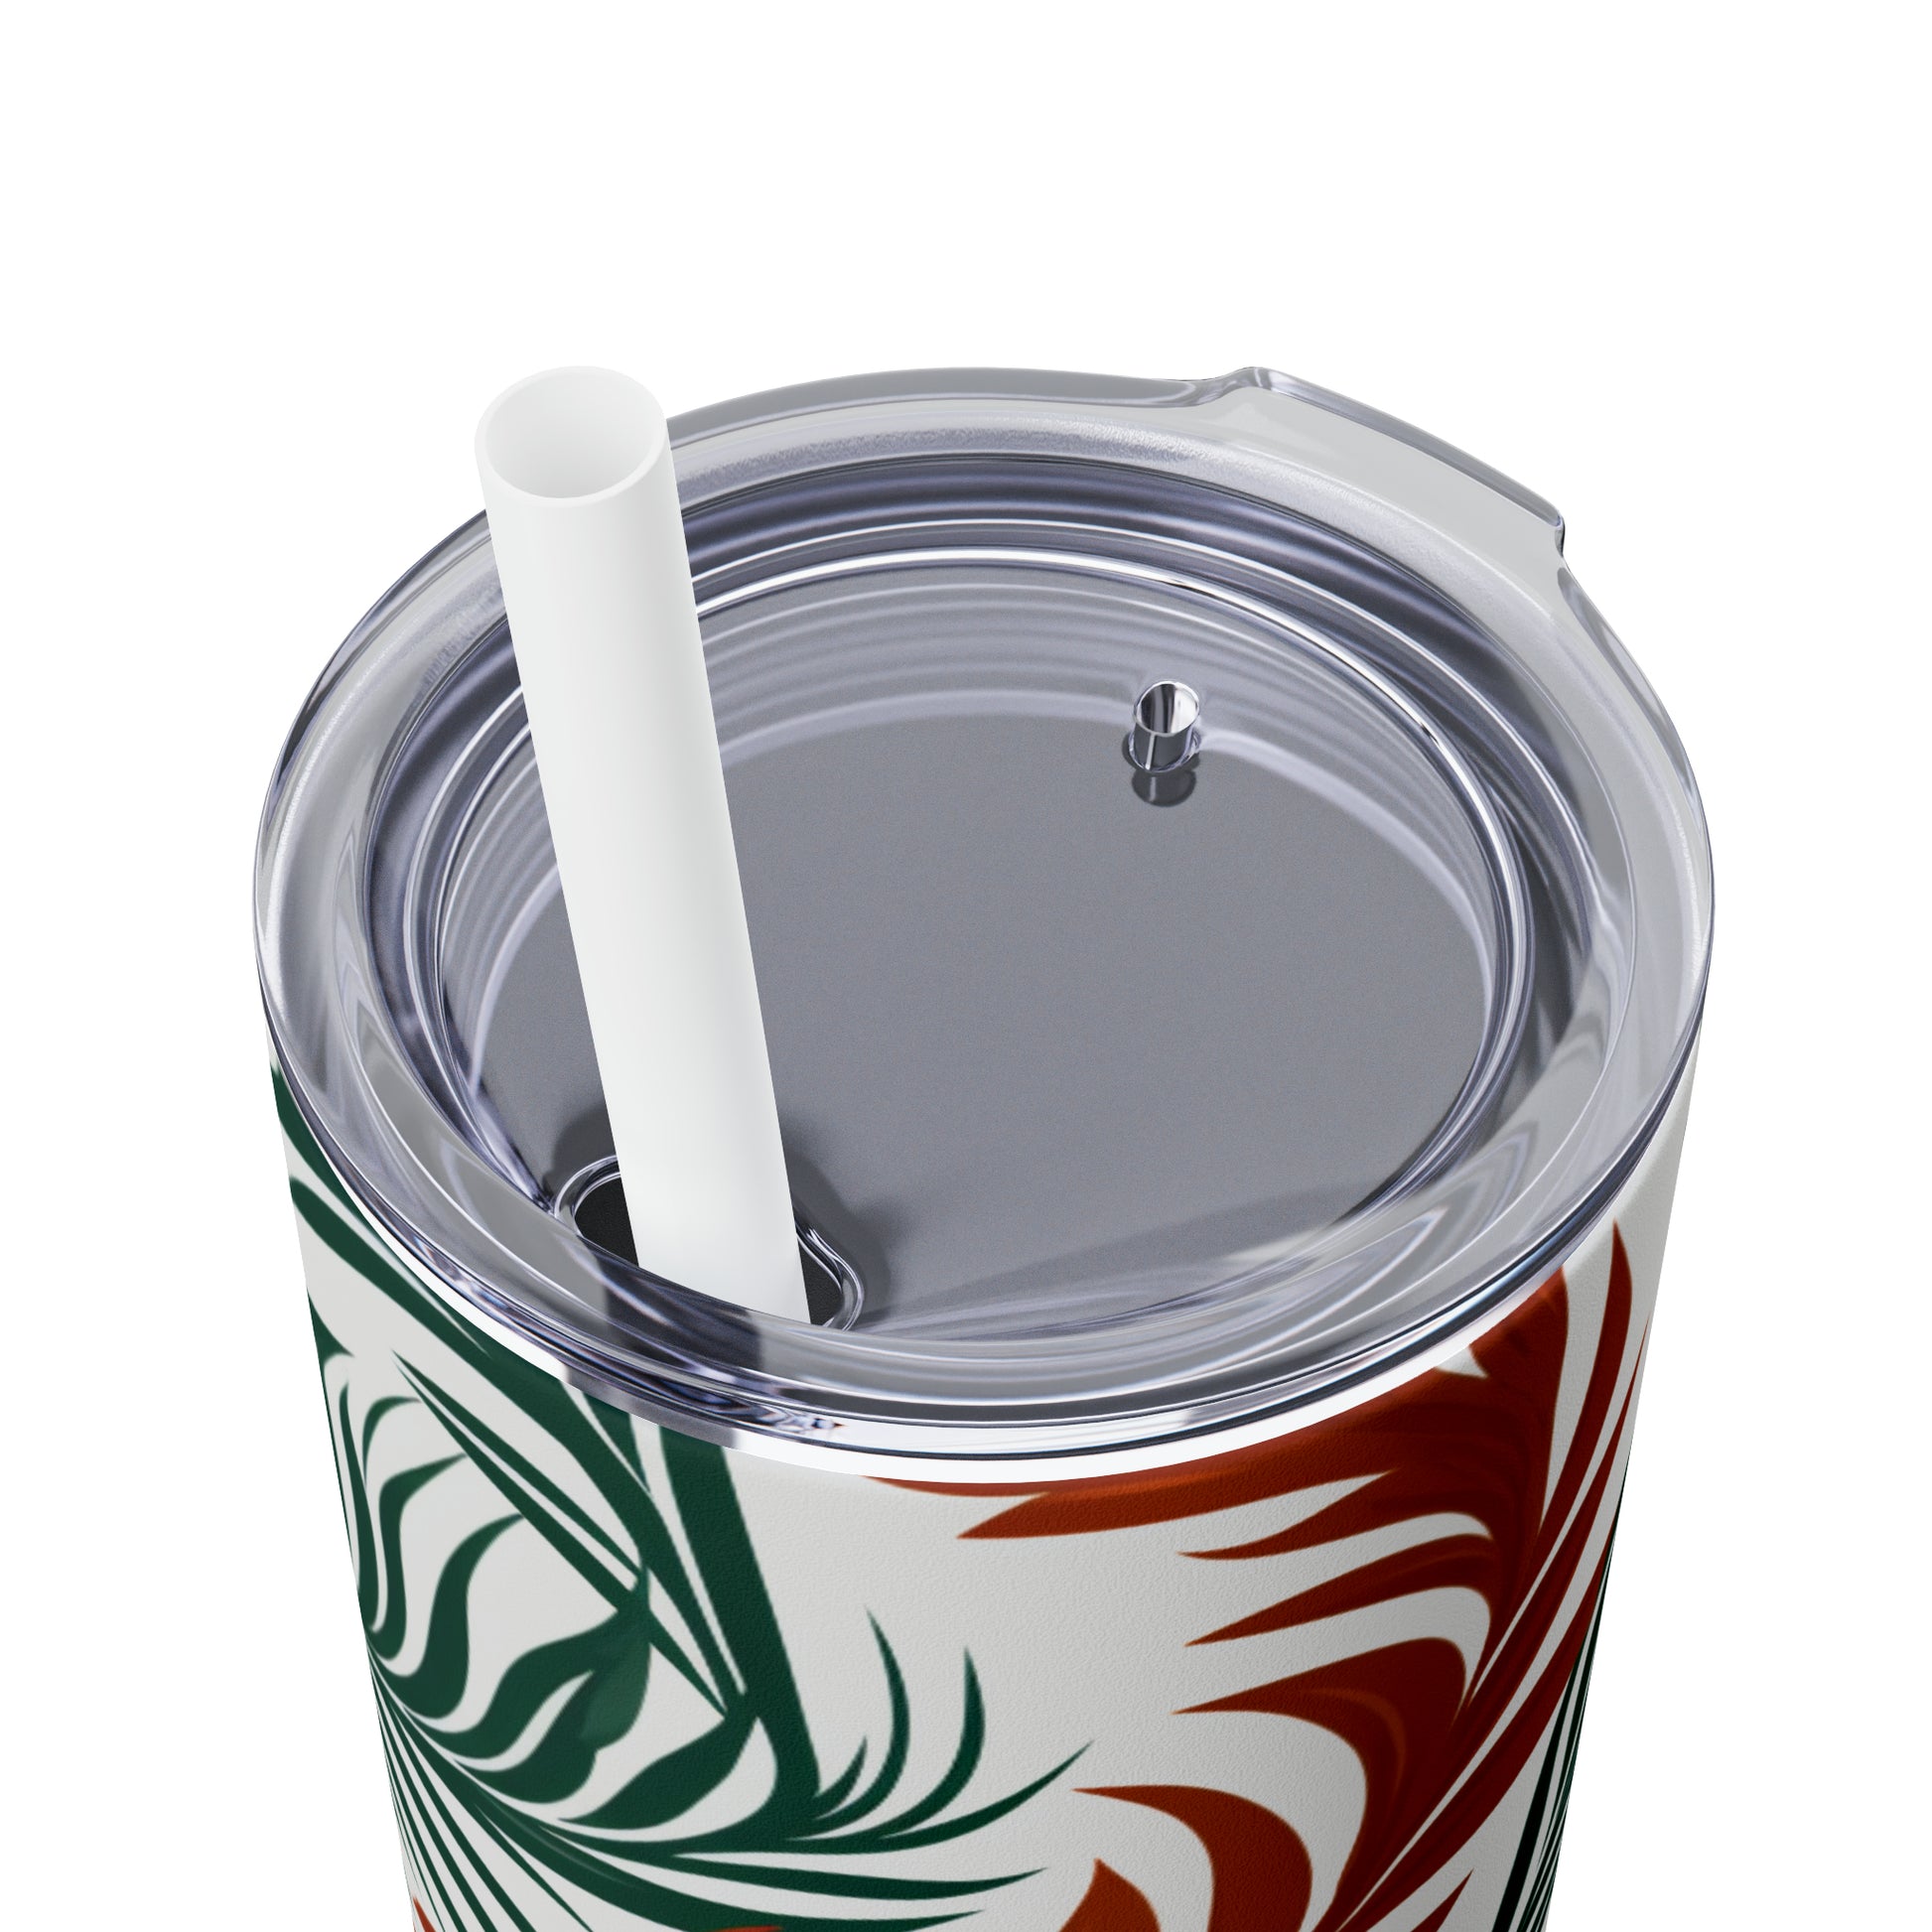 Nature's Pallete 20-Ounce Insulated Stainless Steel Skinny Tumbler with Lid and Straw - Dyborn Designs